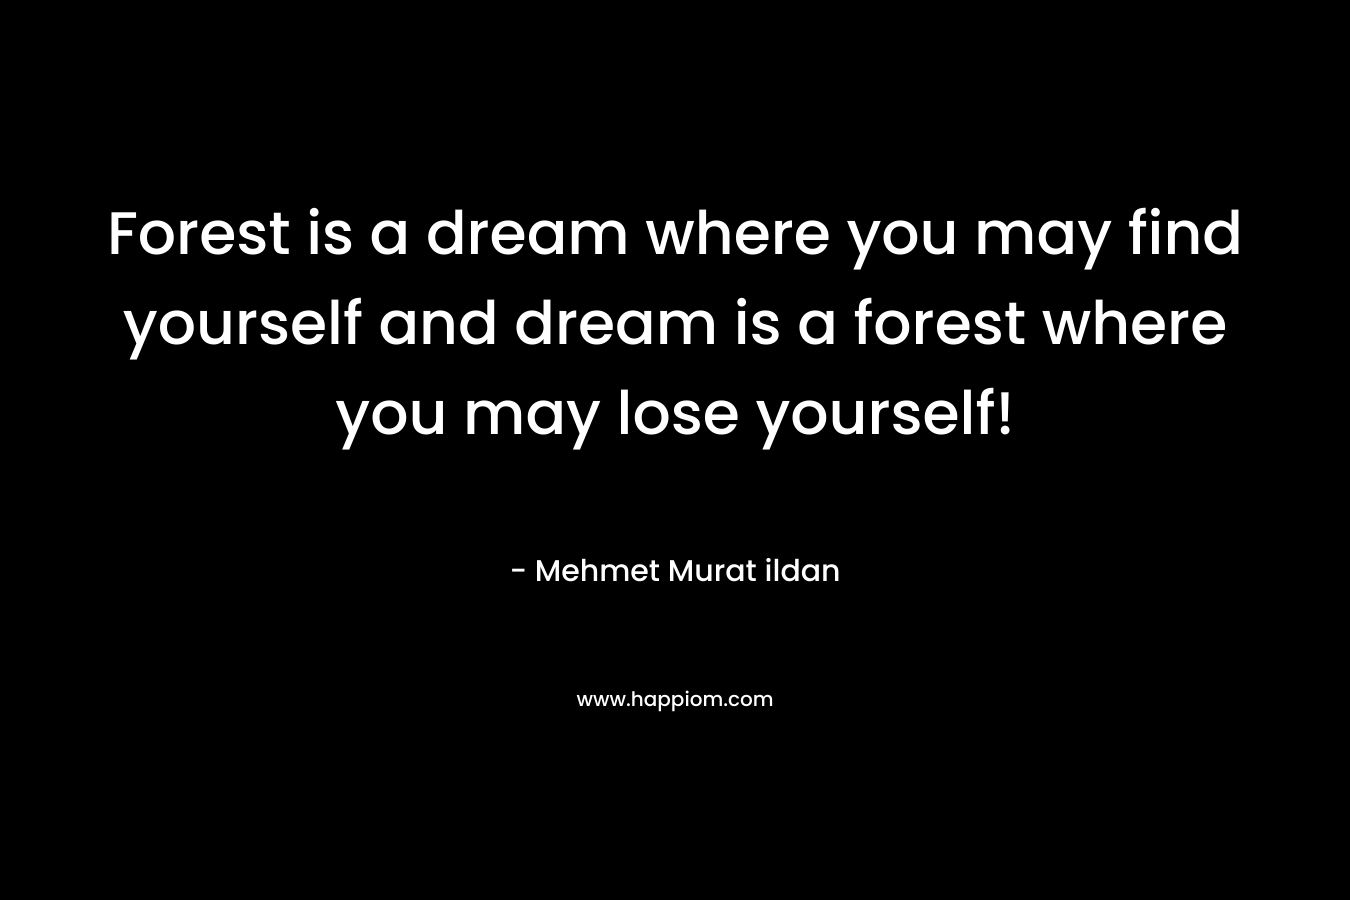 Forest is a dream where you may find yourself and dream is a forest where you may lose yourself!